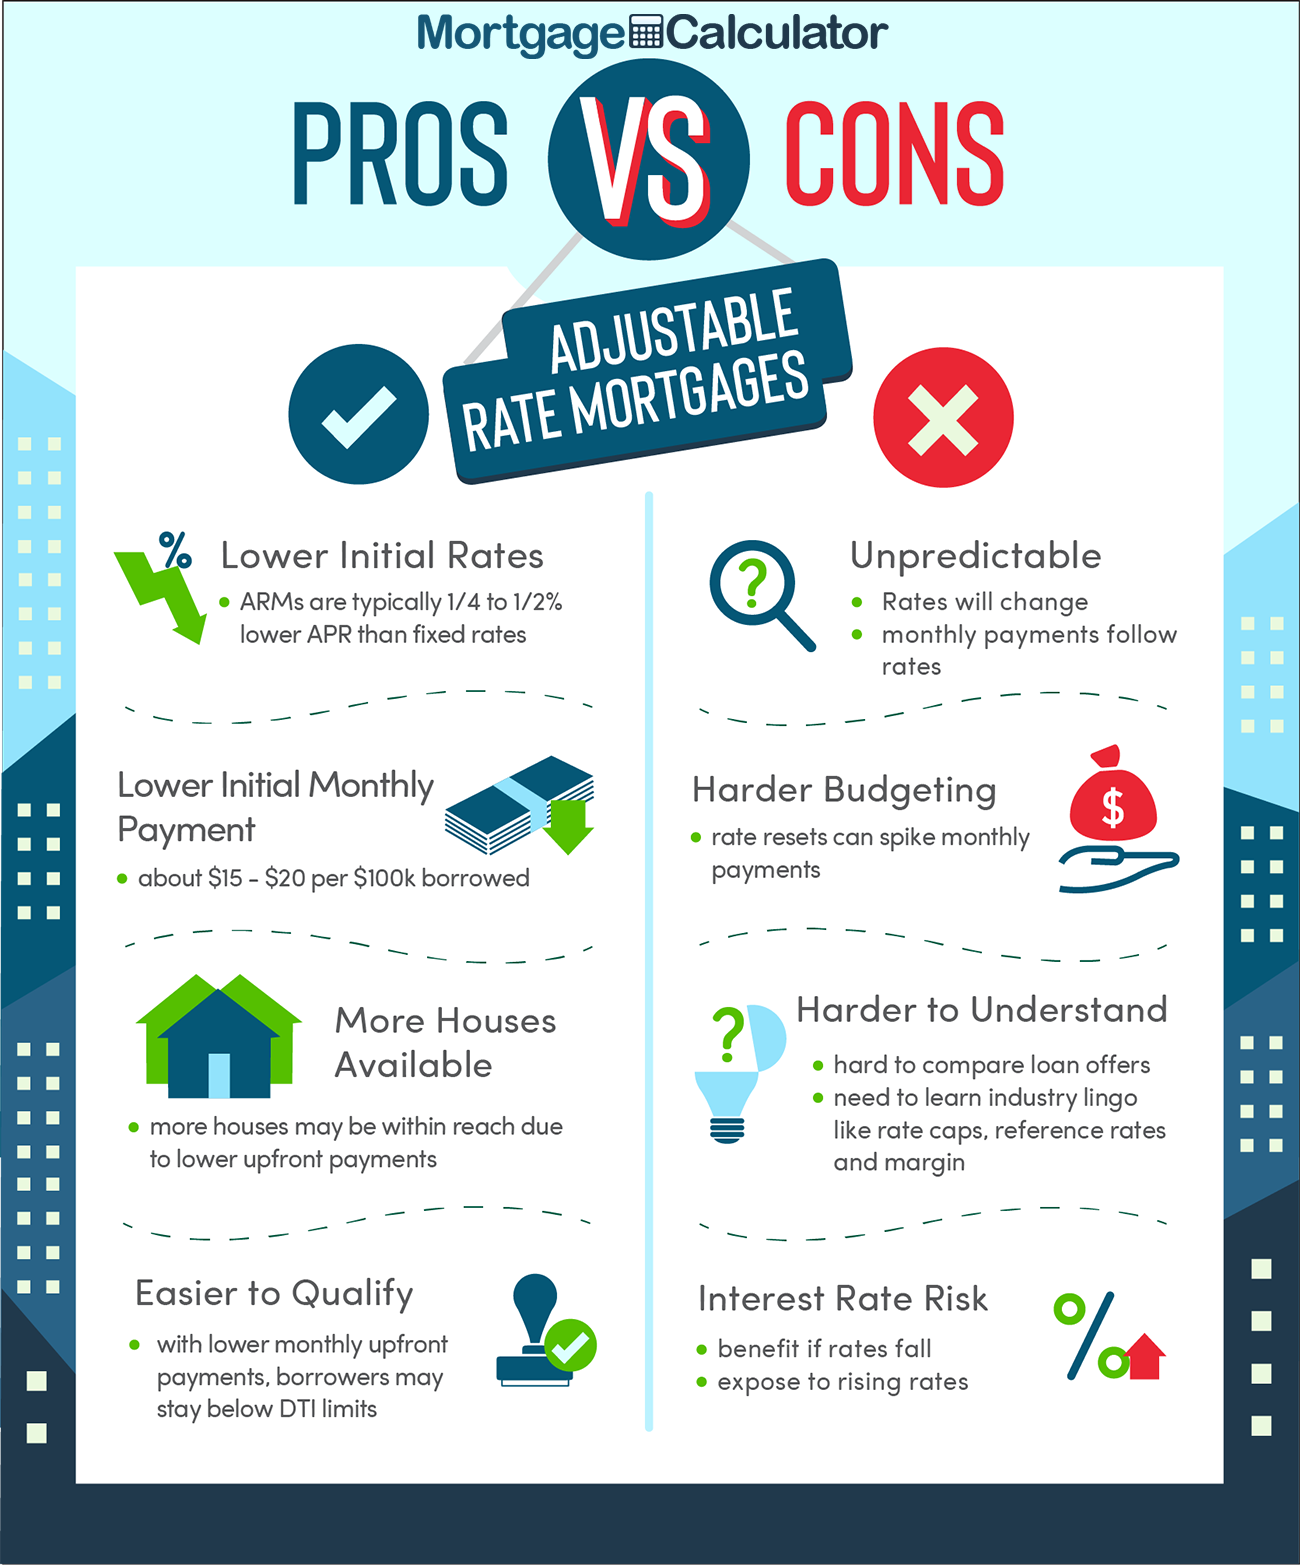 ARM Mortgage Pros and Cons.